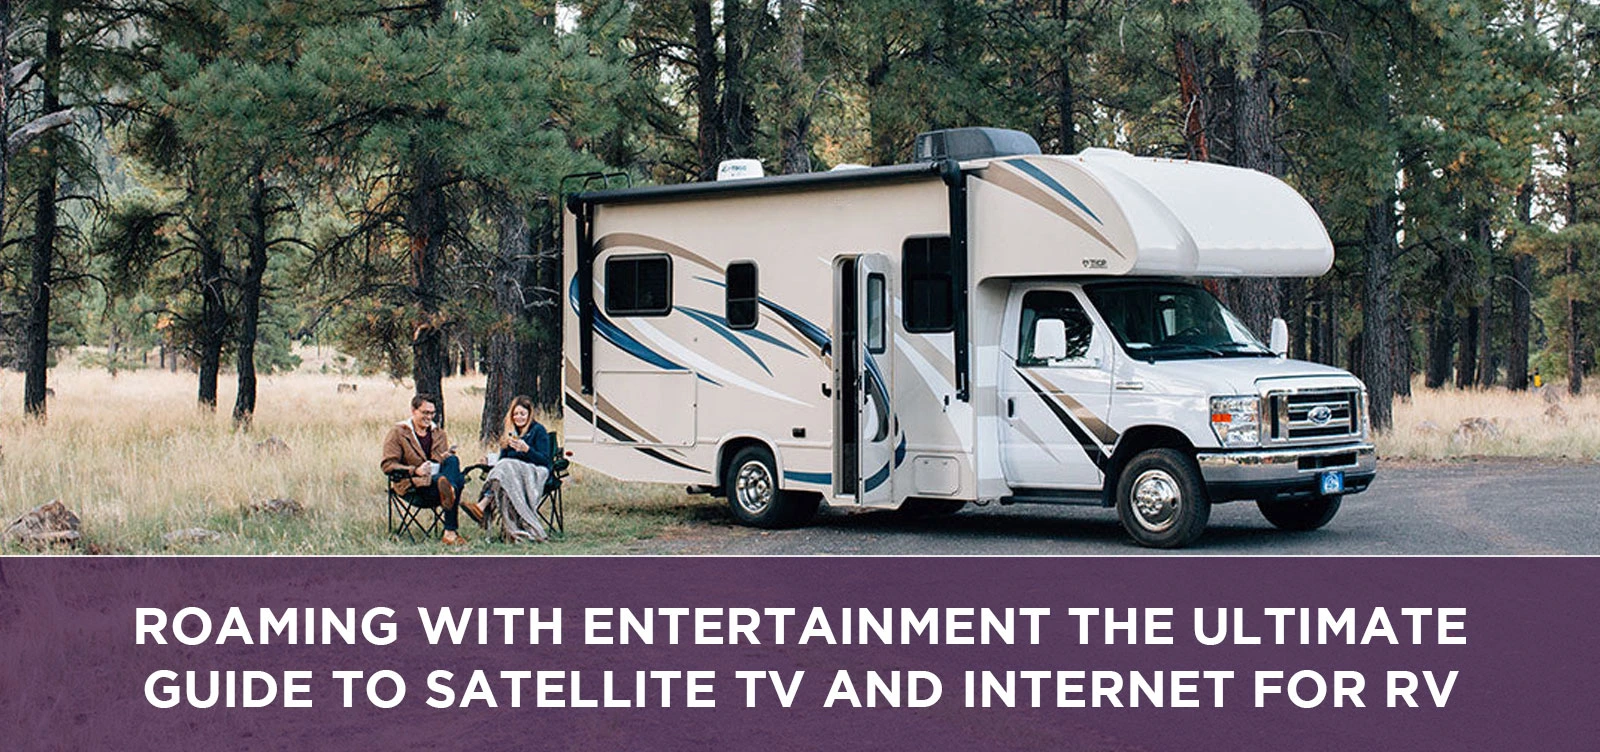 Roaming with Entertainment The Ultimate Guide to Satellite TV and Internet for RVs